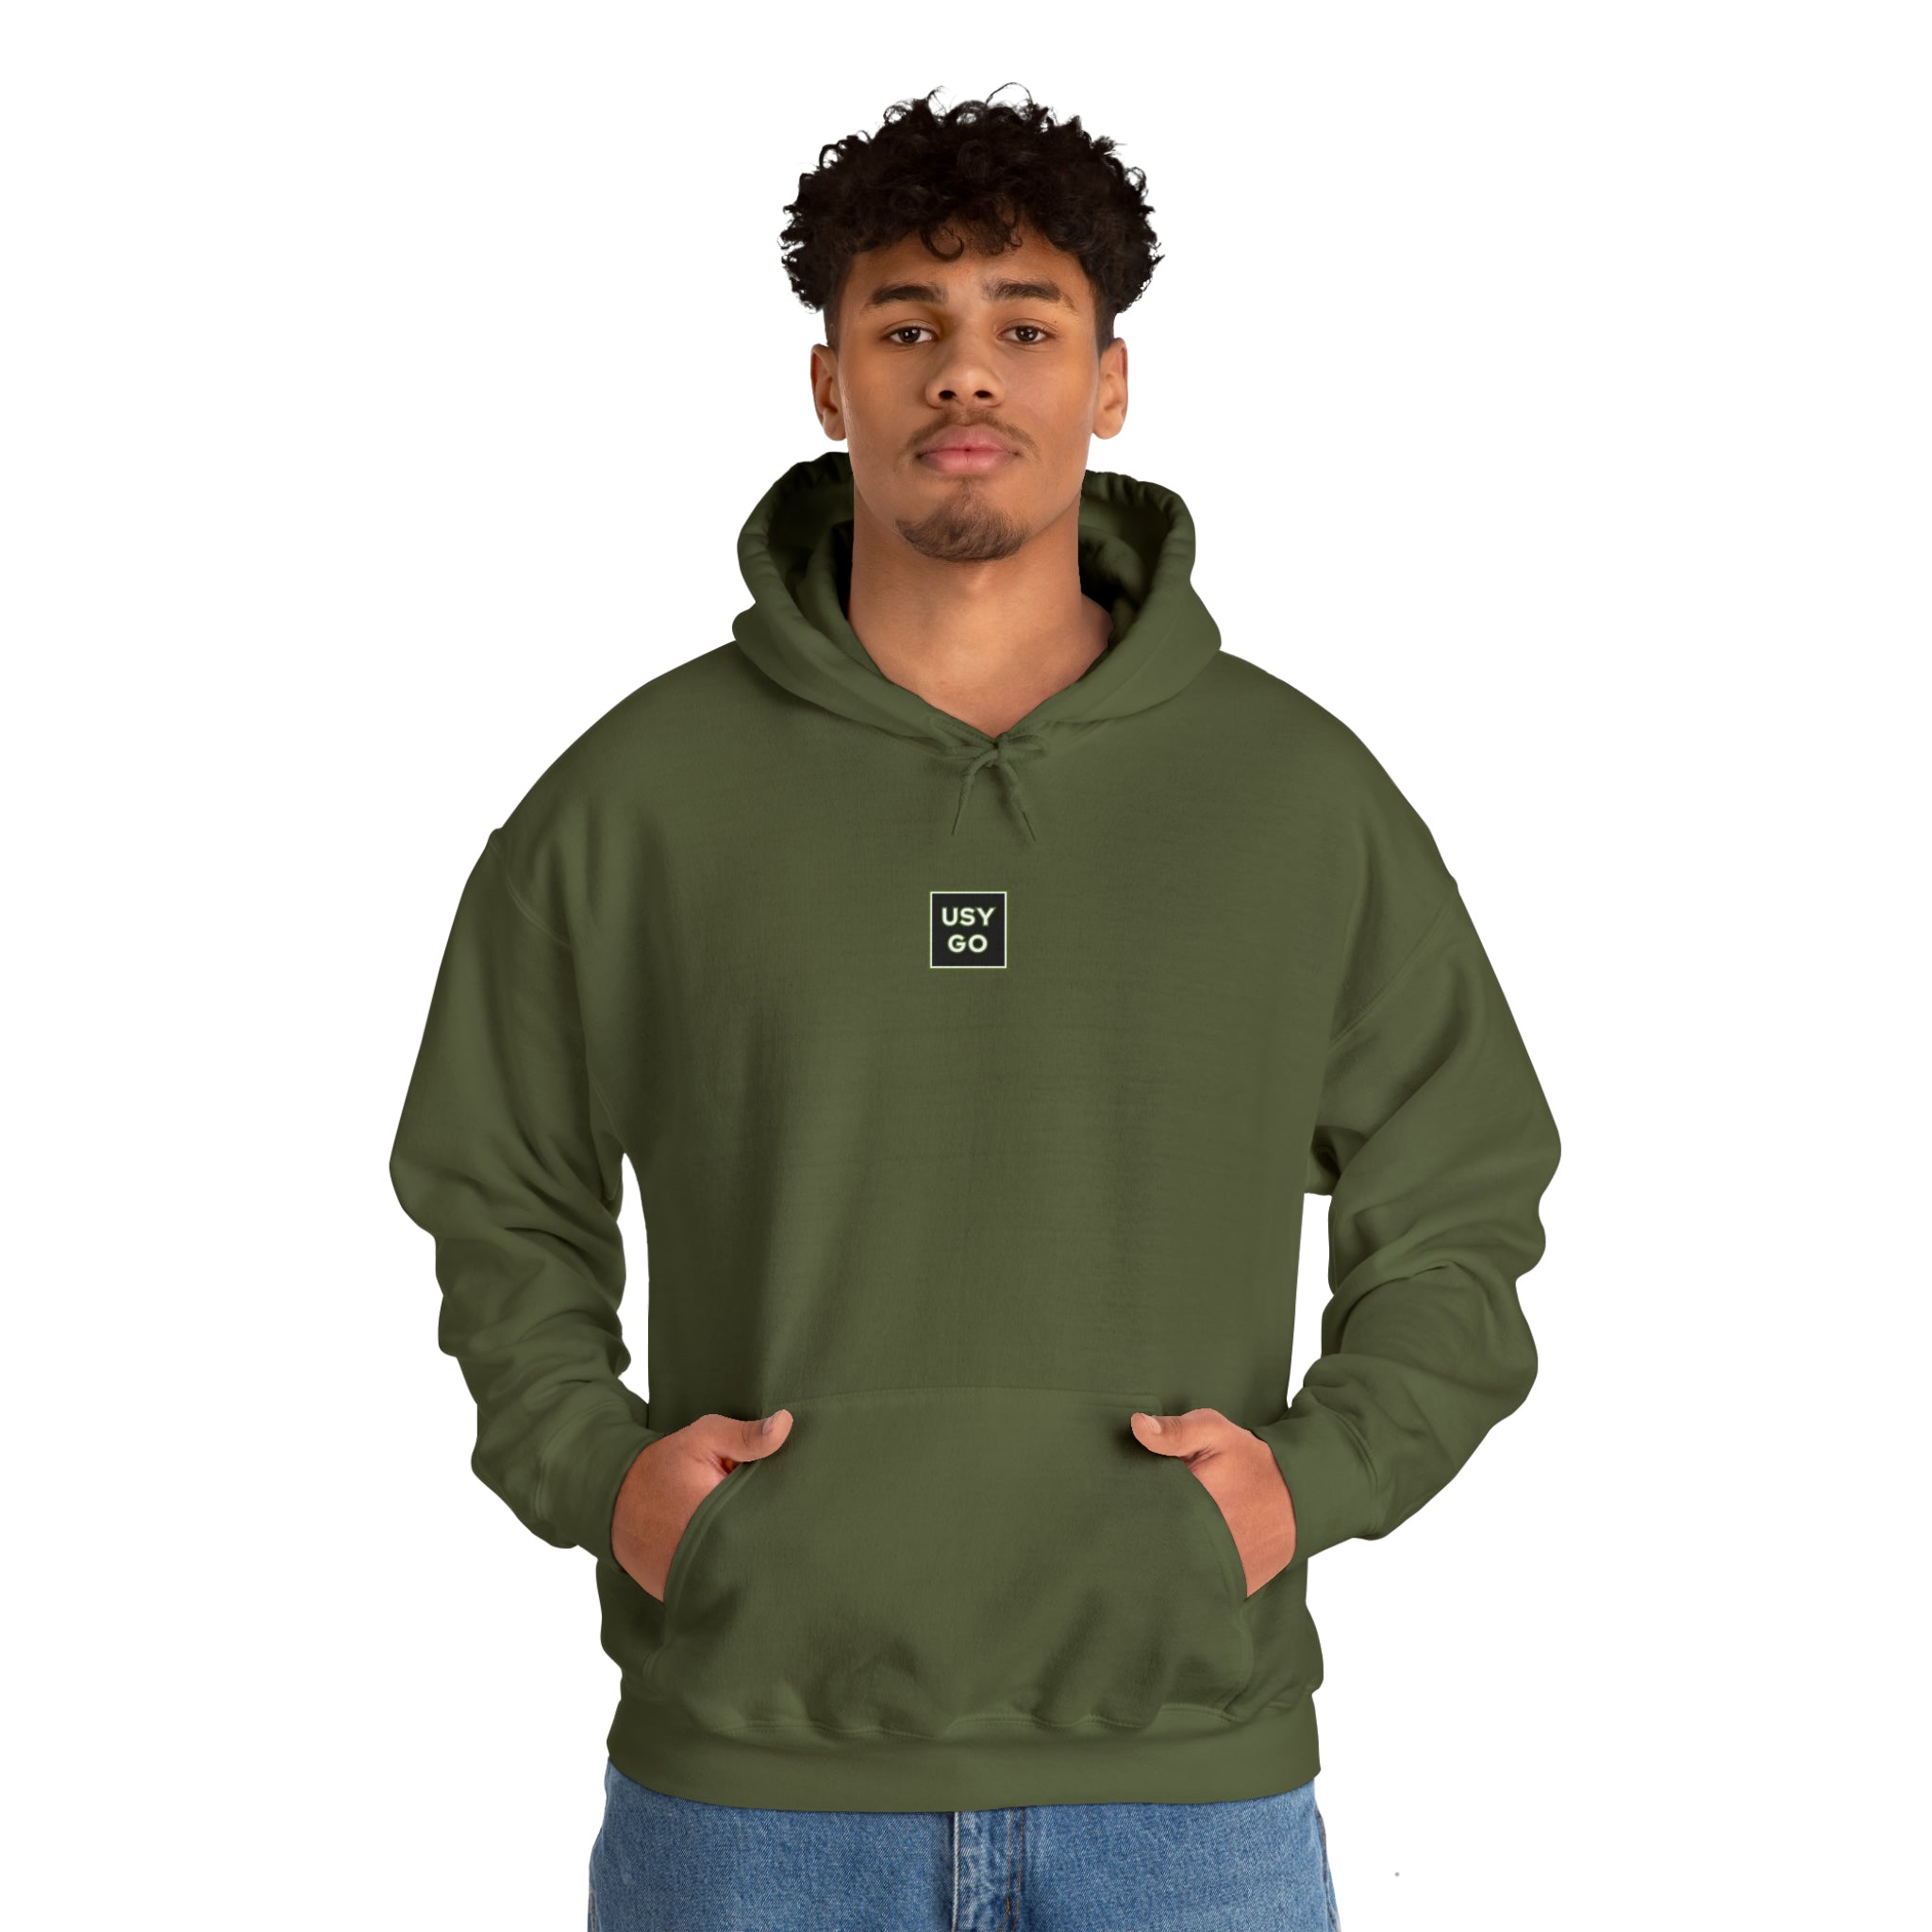 Unisex Military Green Ace Hoodie